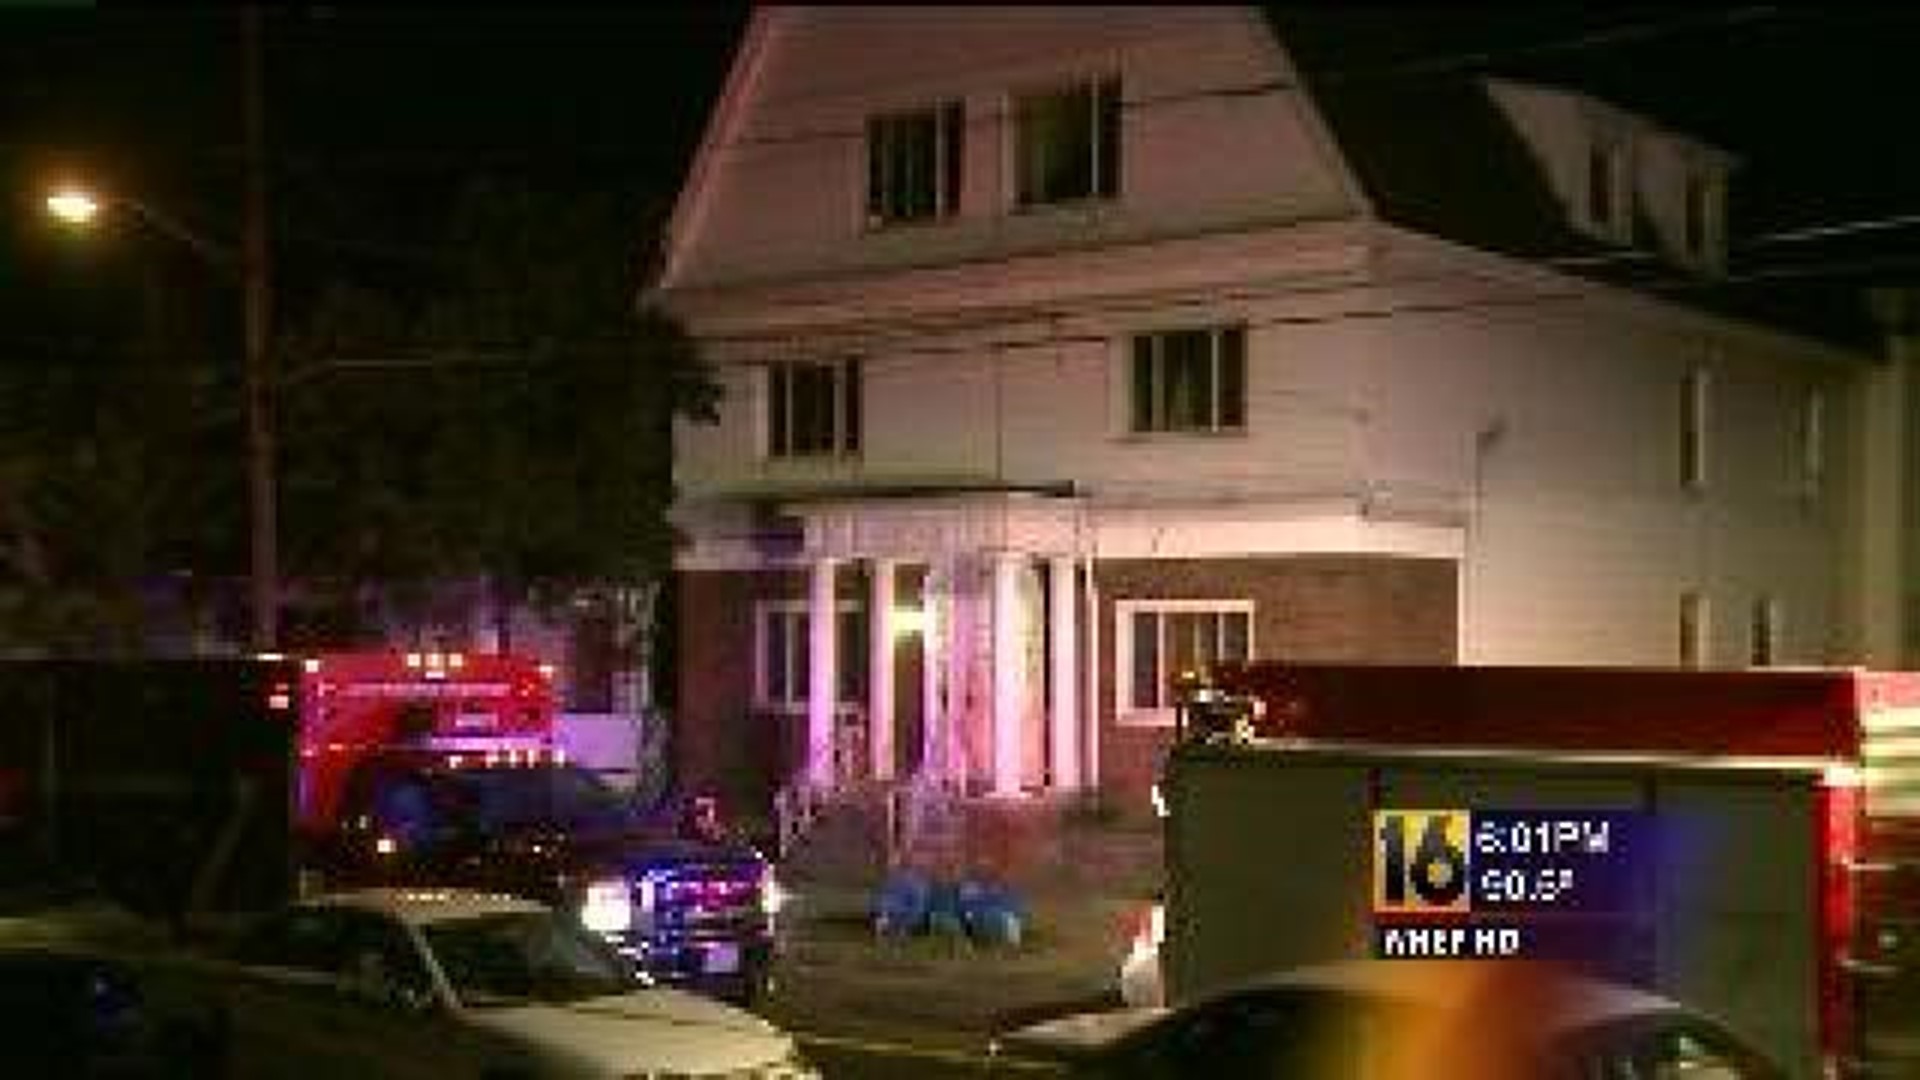 More Questions About Crime in Wilkes-Barre After Shooting